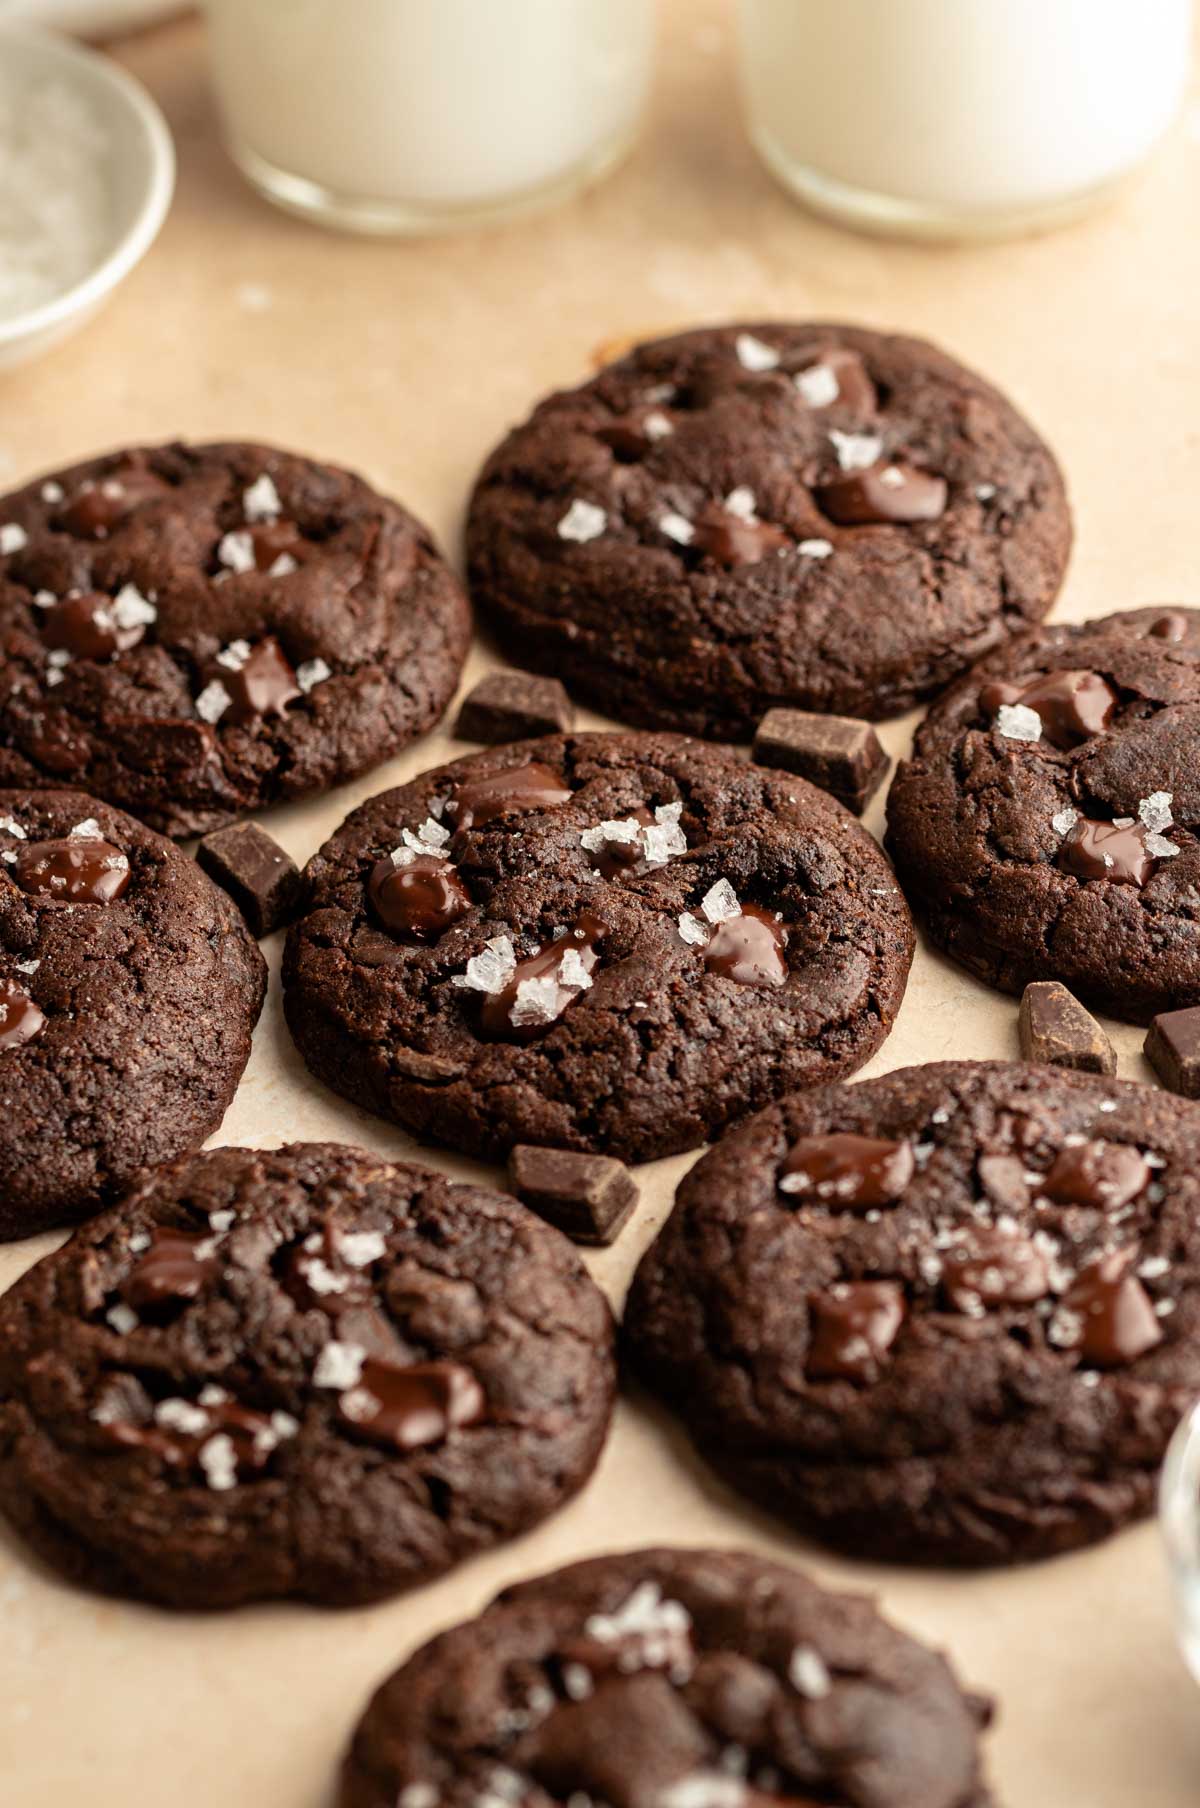 Chocolate cookies with flakey salt on top.